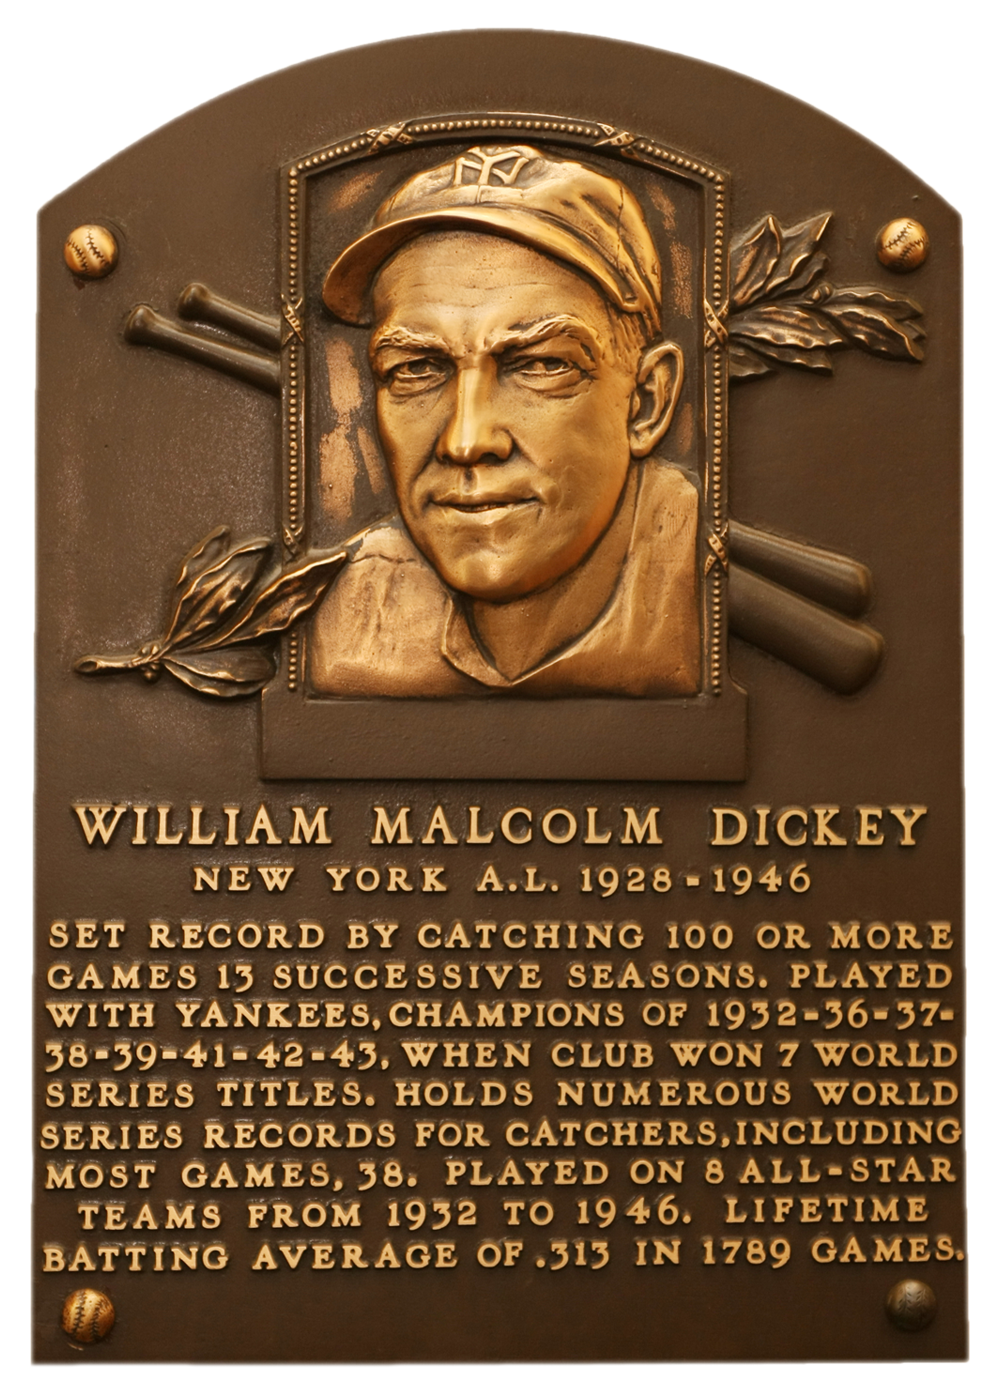 Bill Dickey Hall of Fame plaque